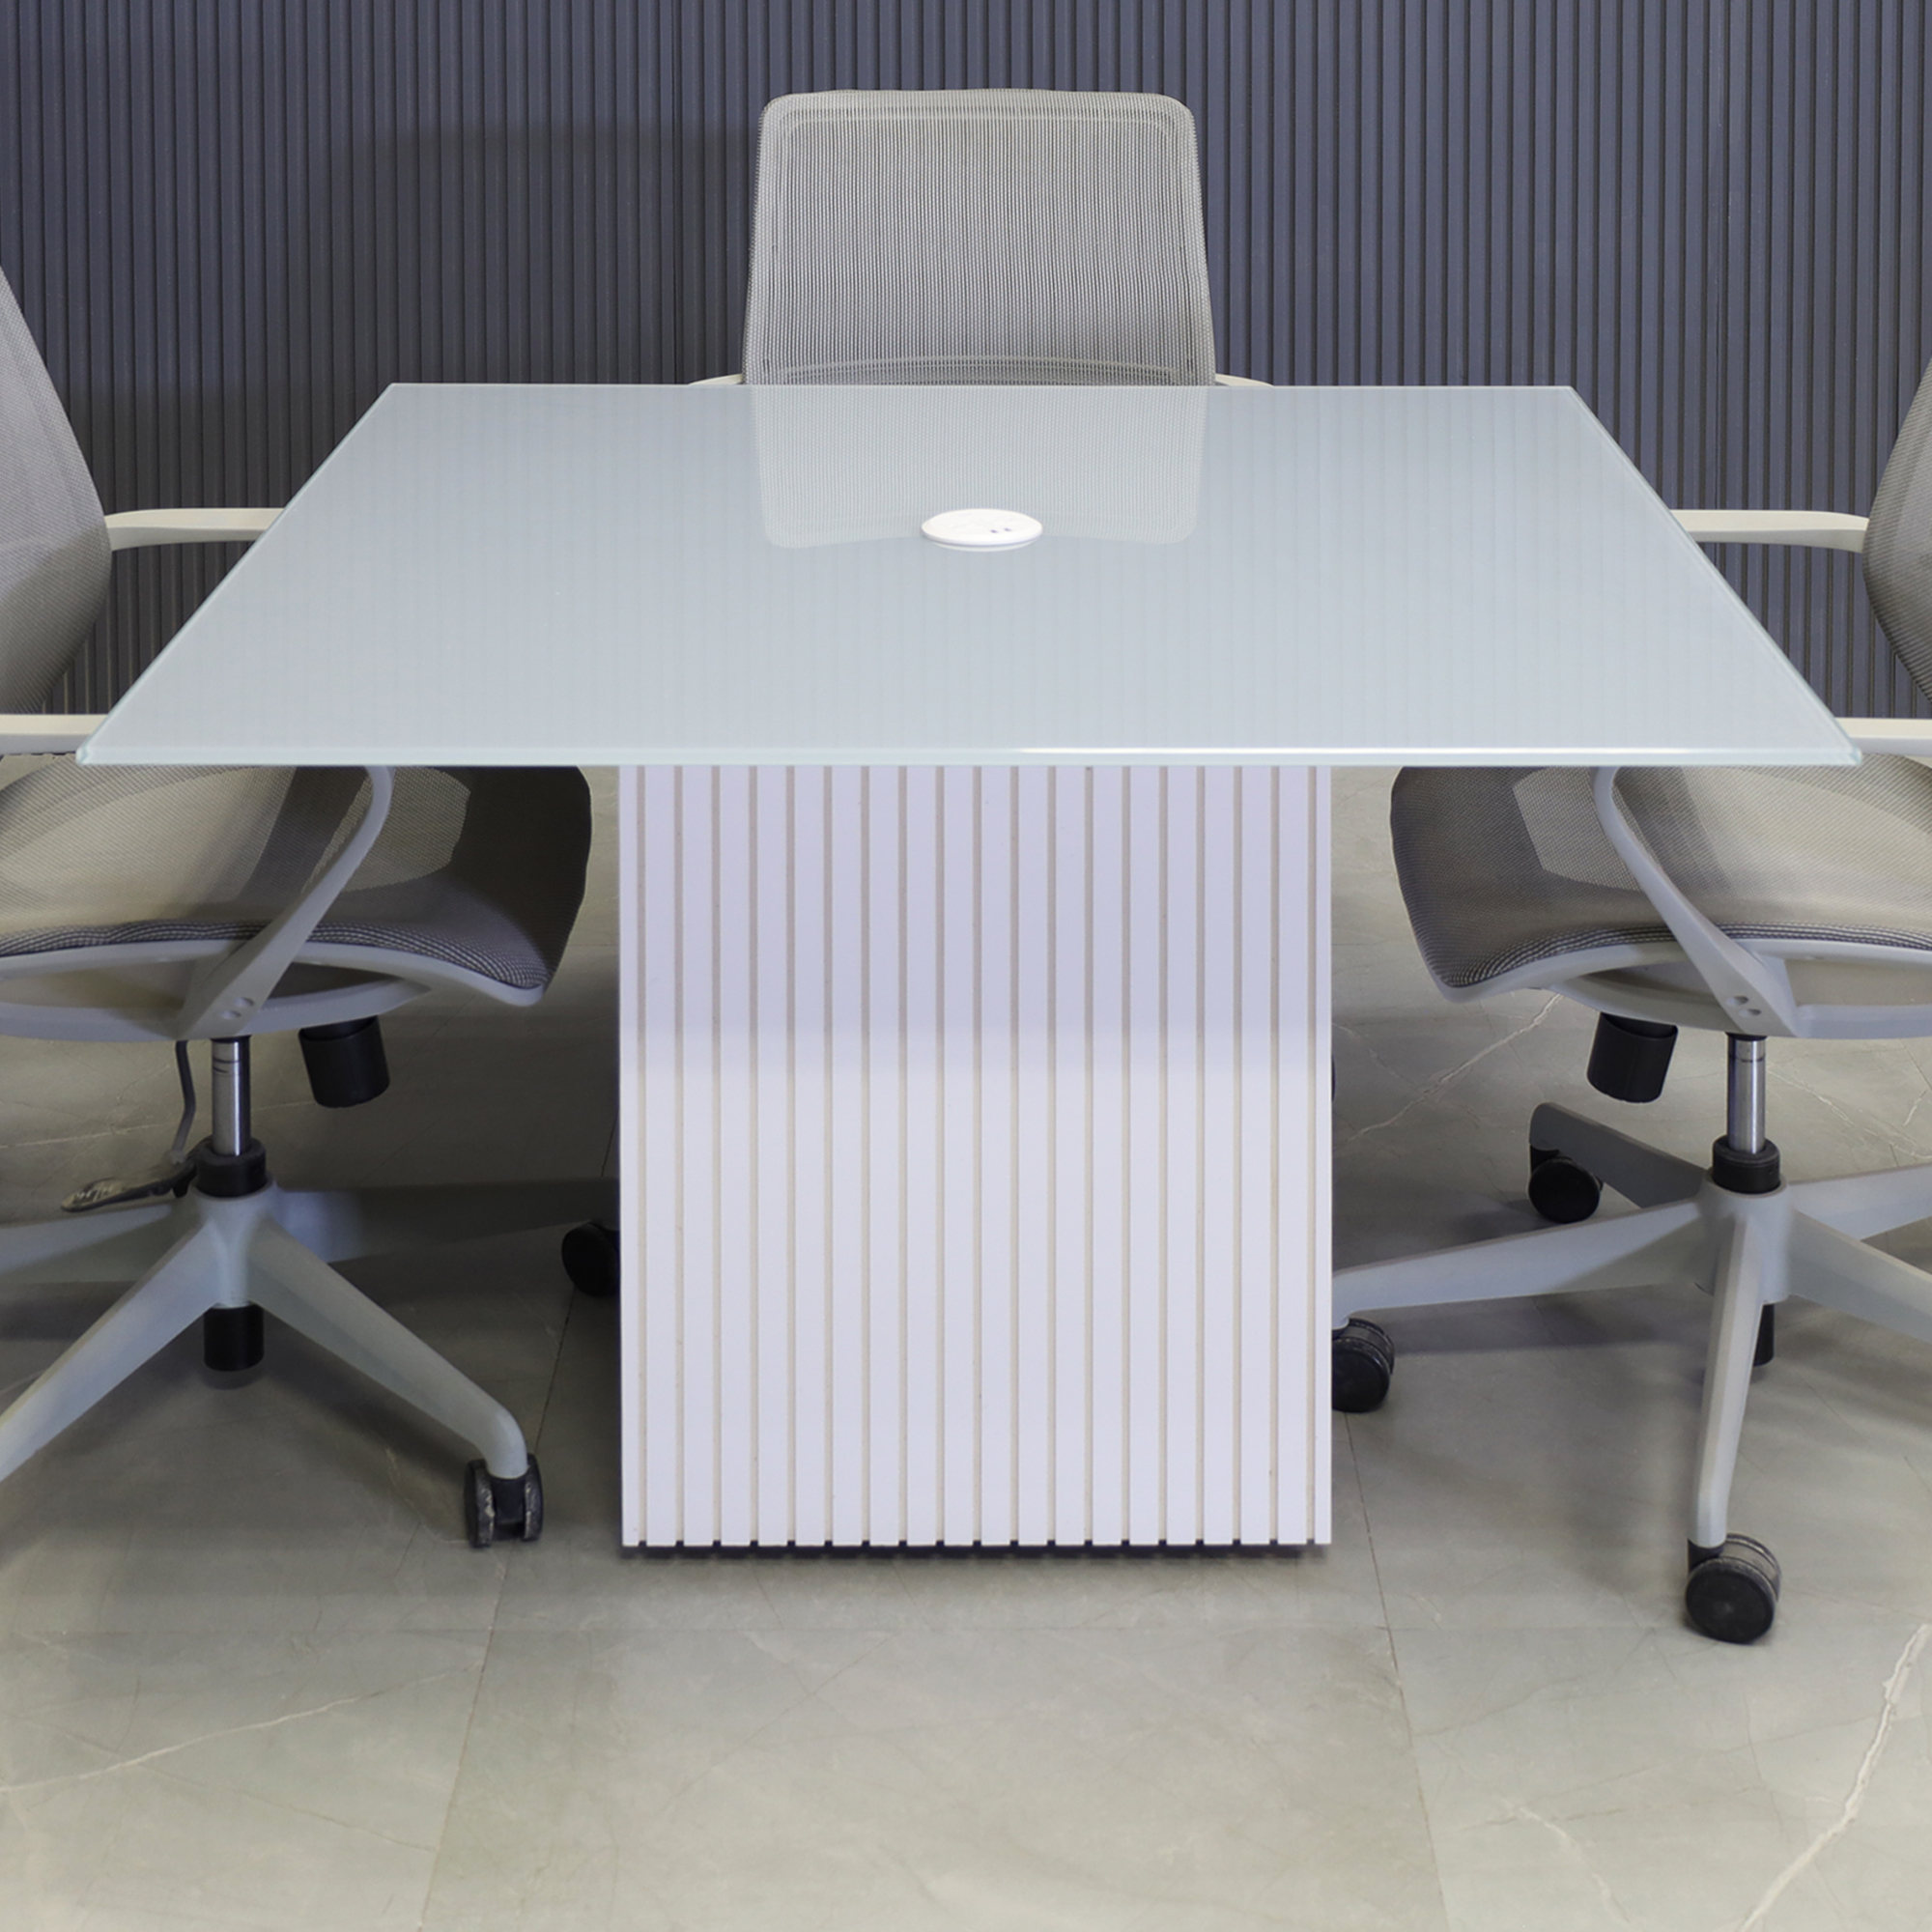 42-inch Omaha Square Conference Table in 1/2